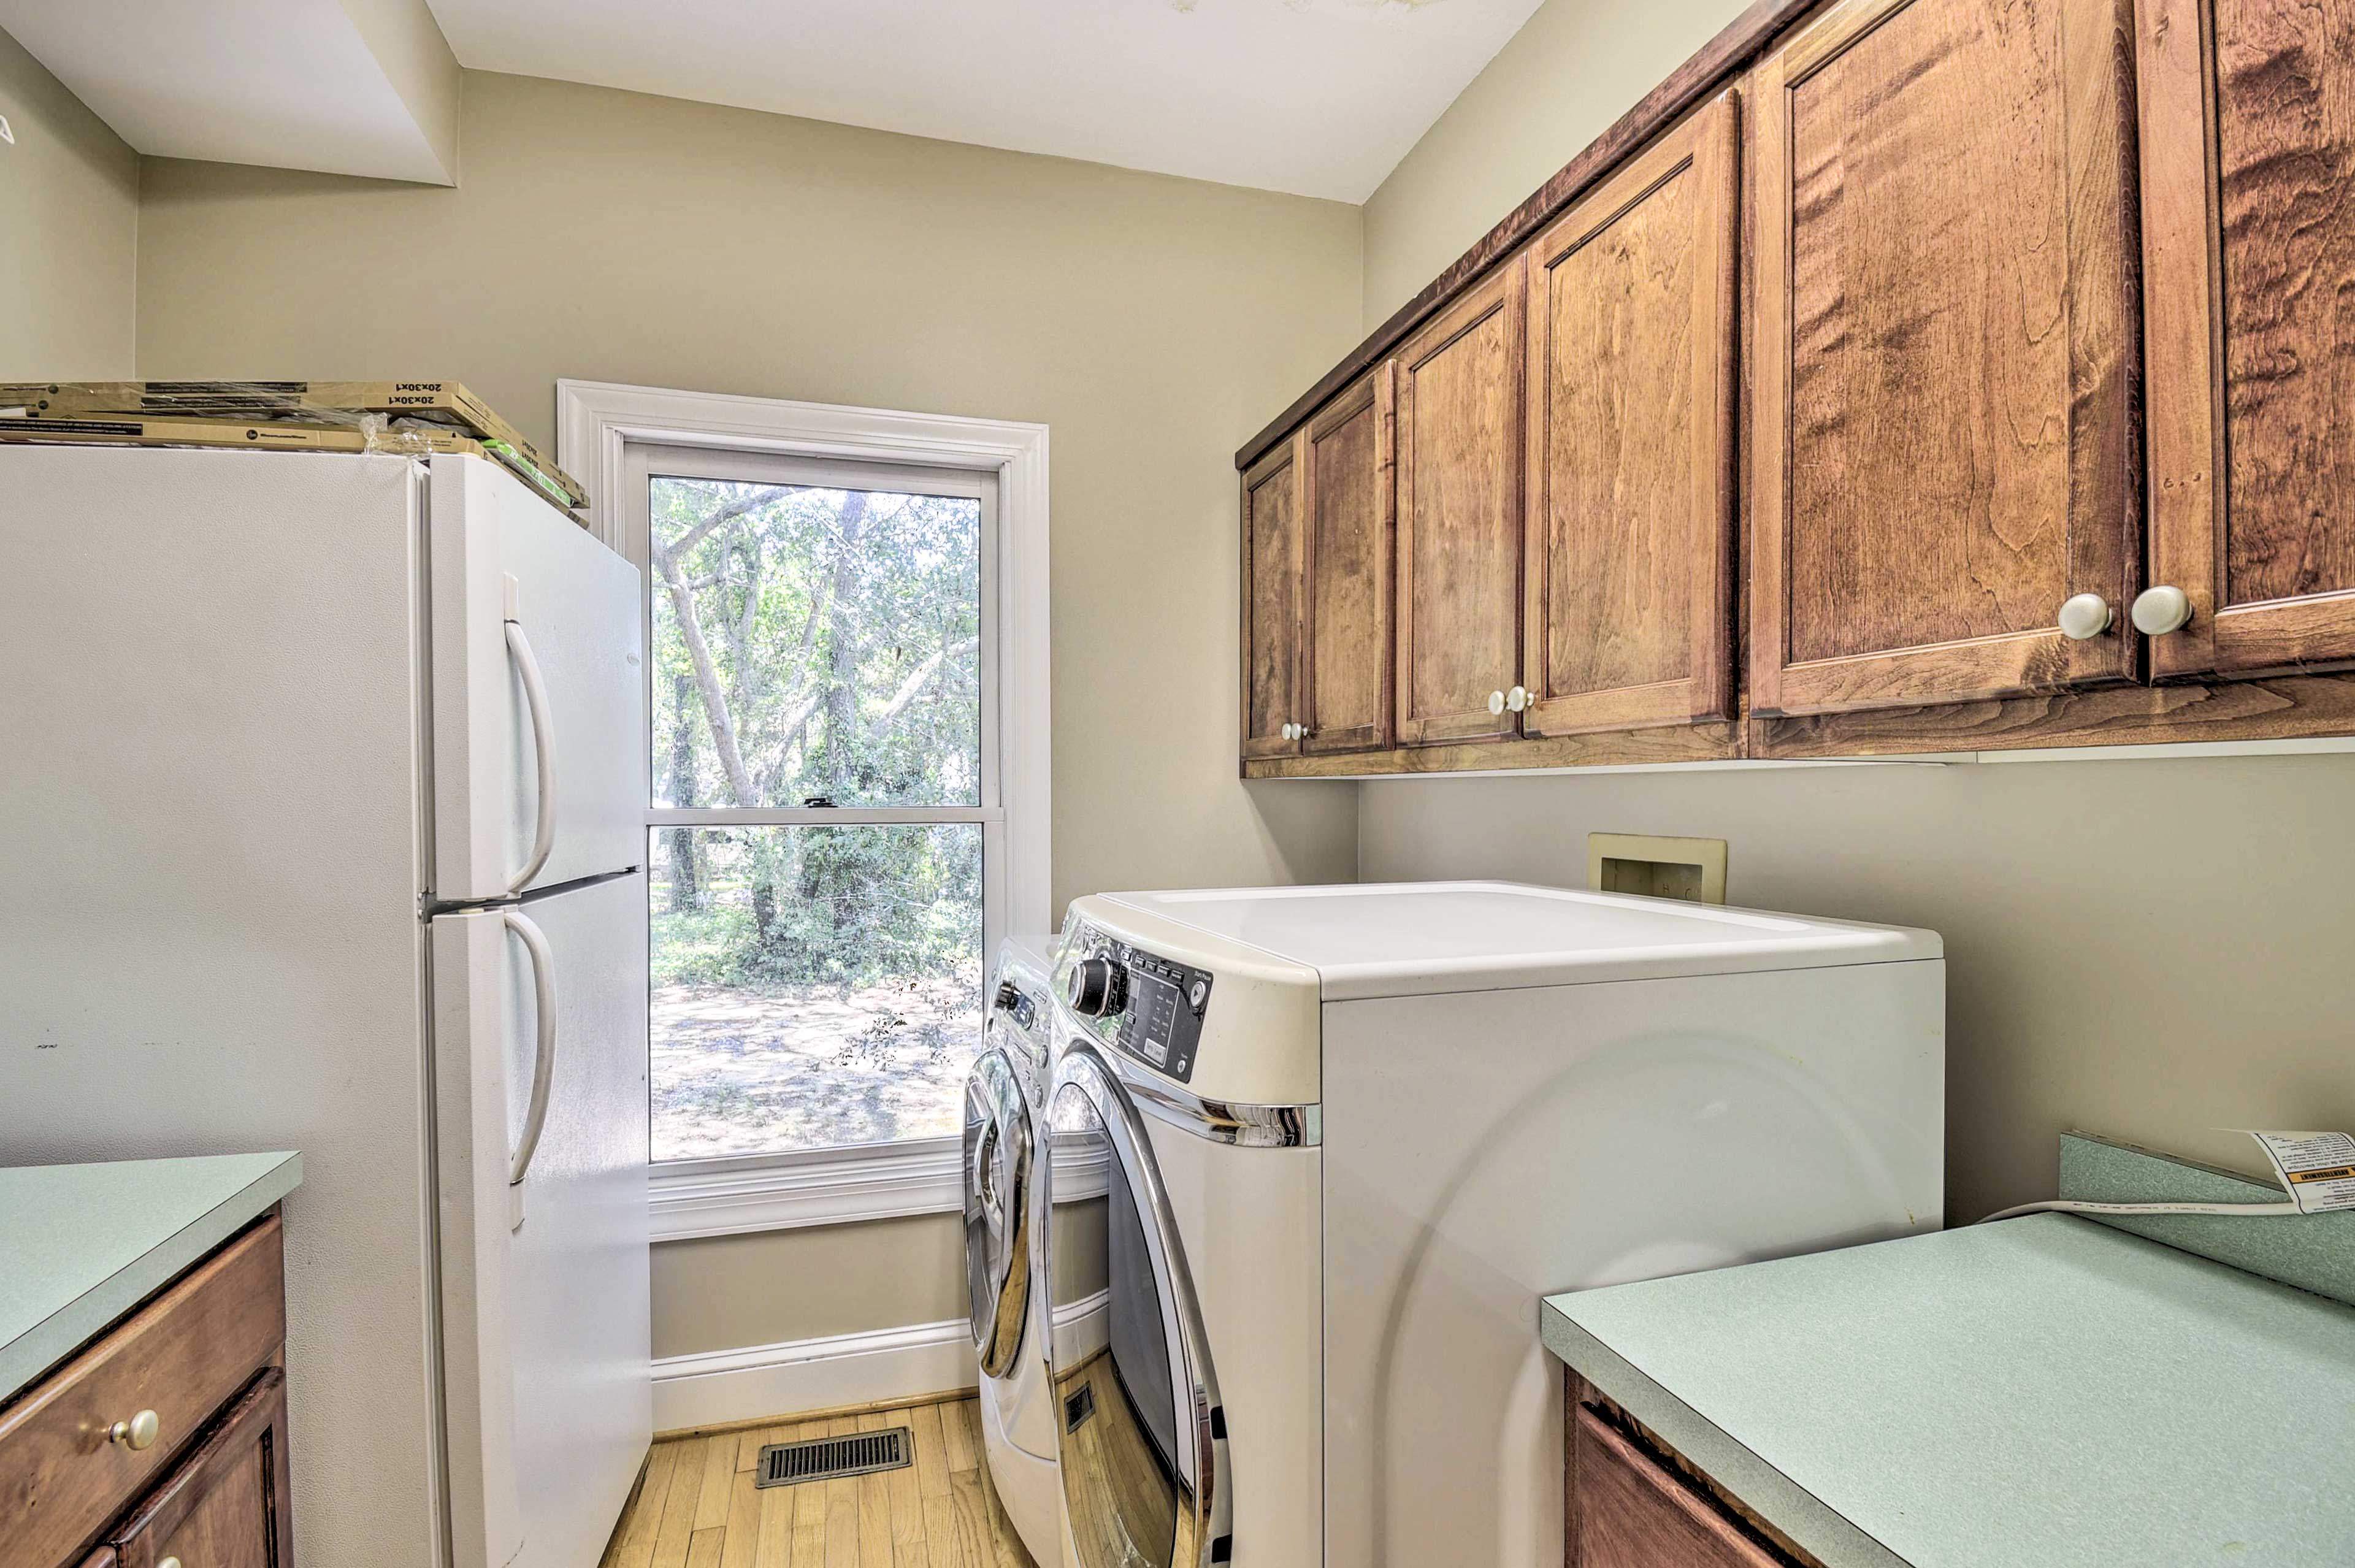 Laundry Area | Washer/Dryer | Clothes Steamer | Iron/Board